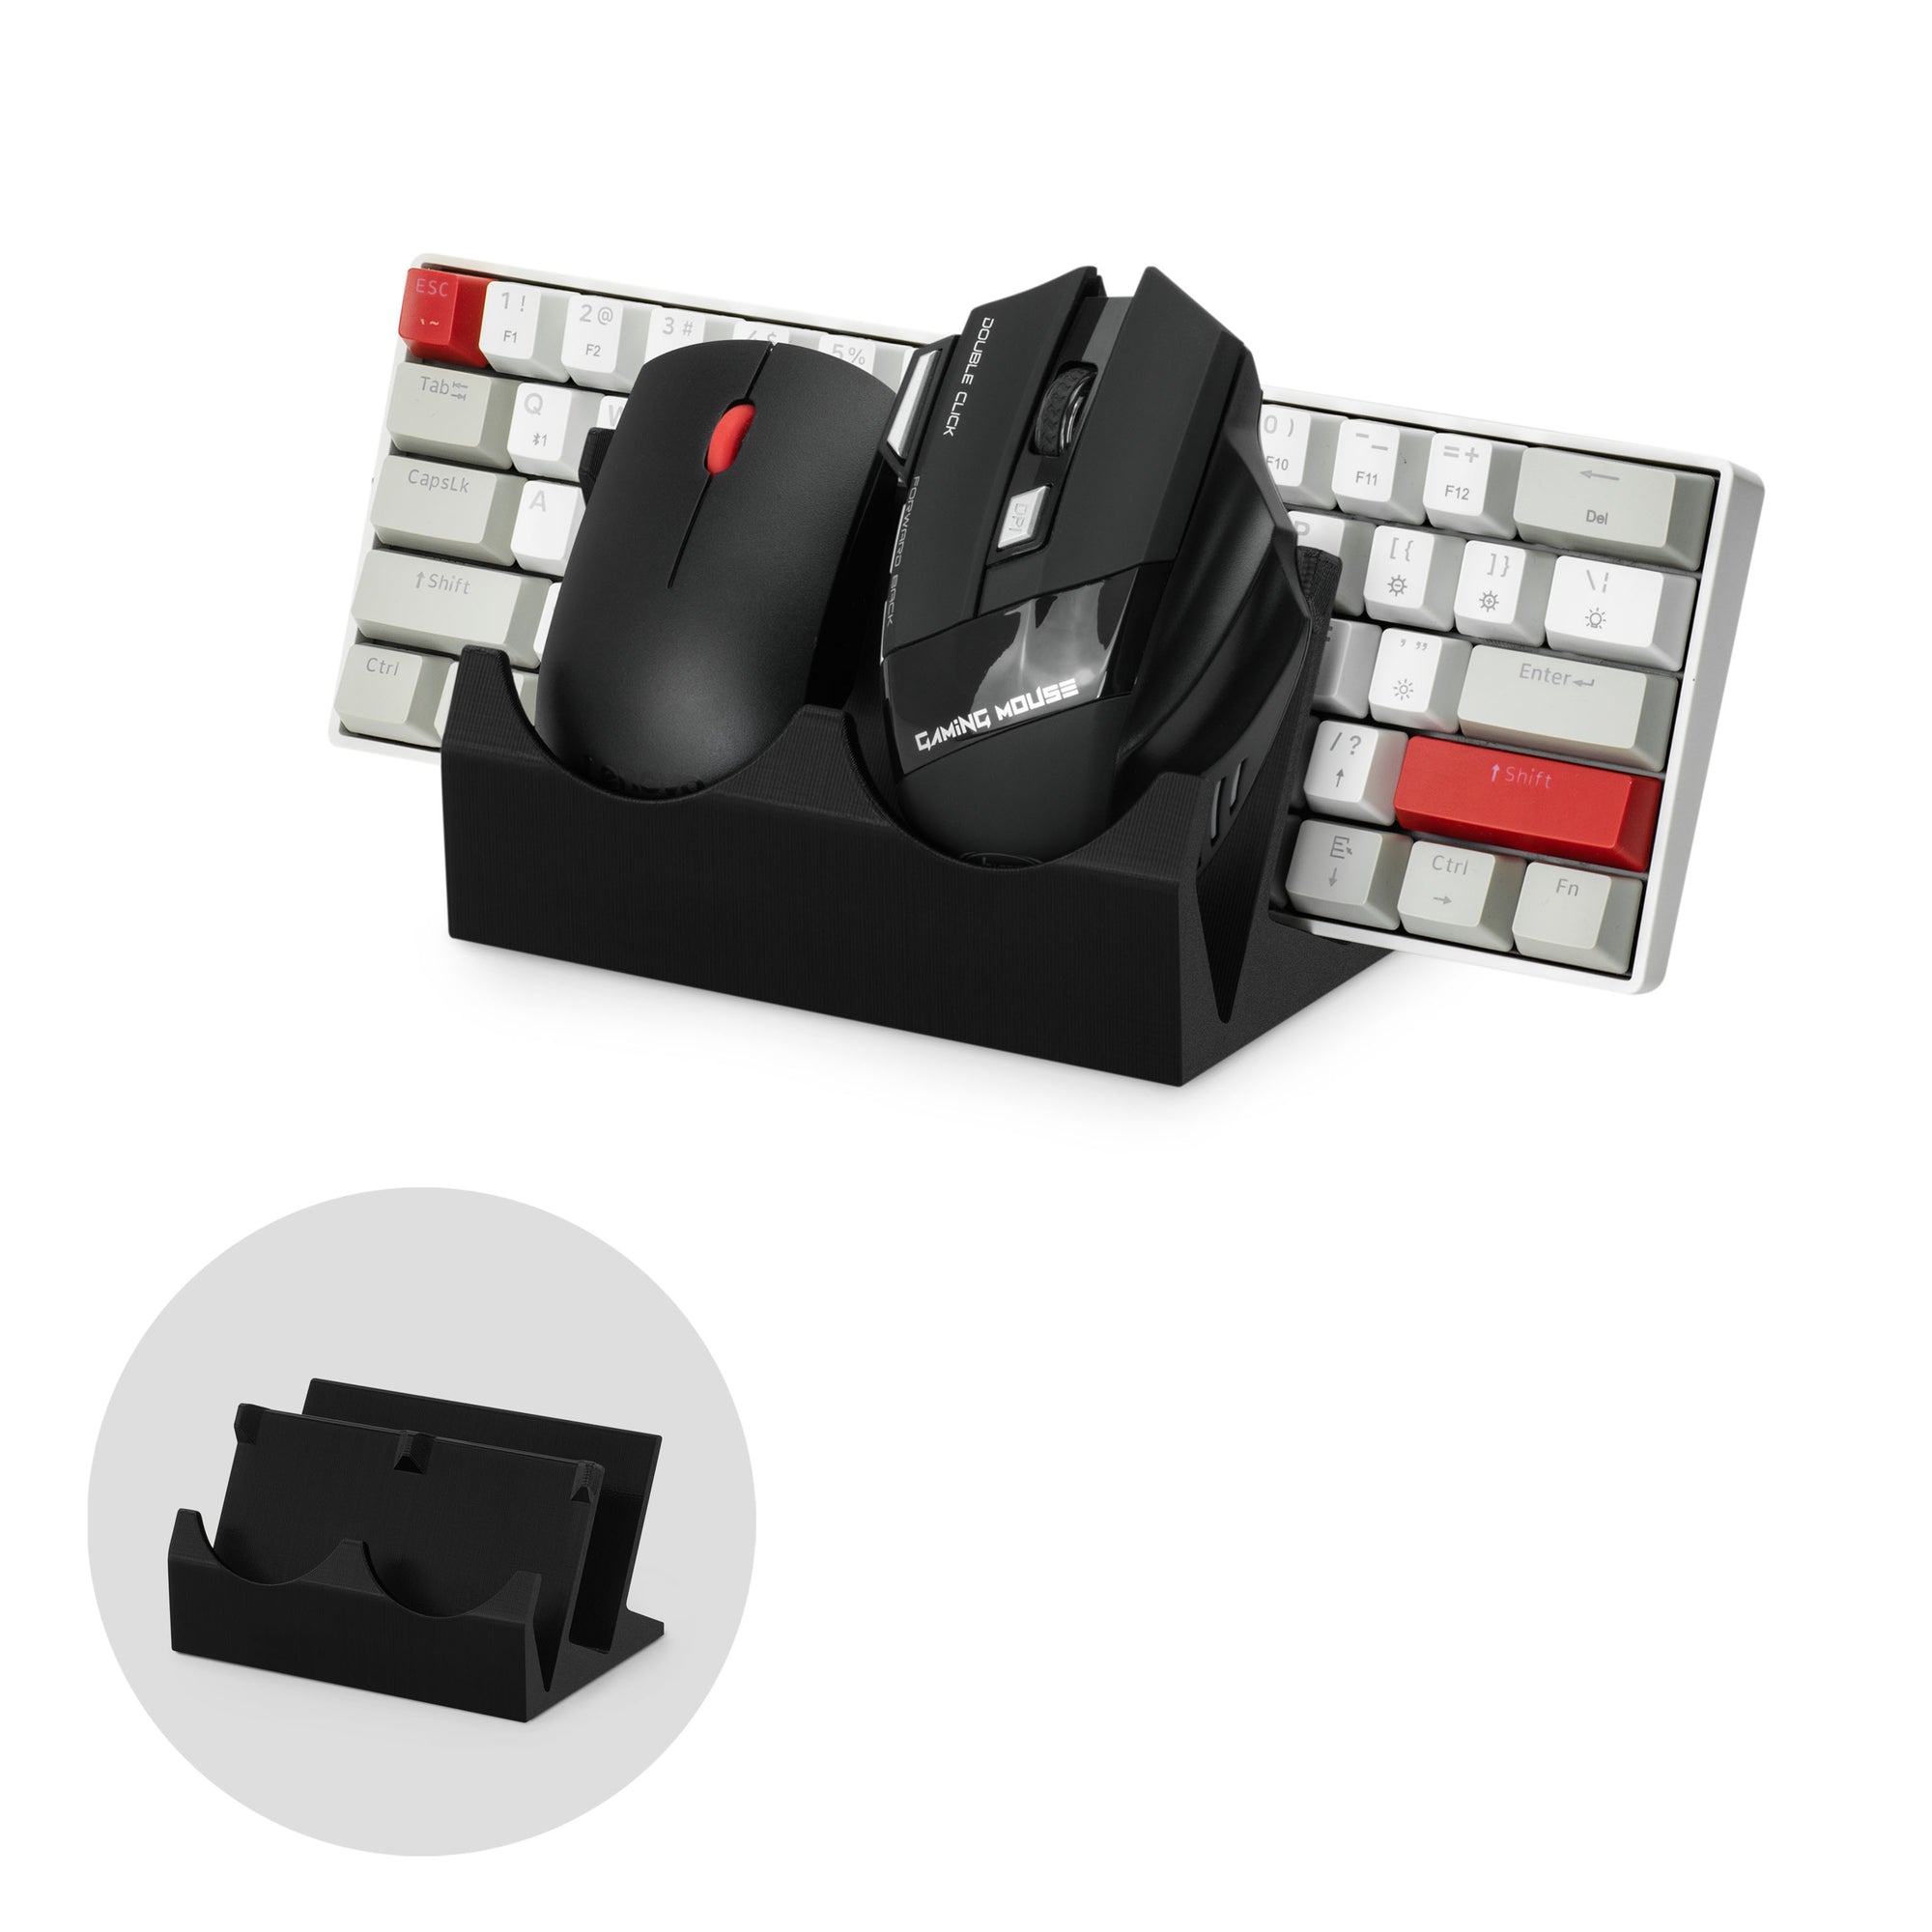 Desktop Keyboard & Dual PC Mouse Stand Holder, Suitable for Small Or Large Keyboards,  Gaming & Office Mice (DK03)